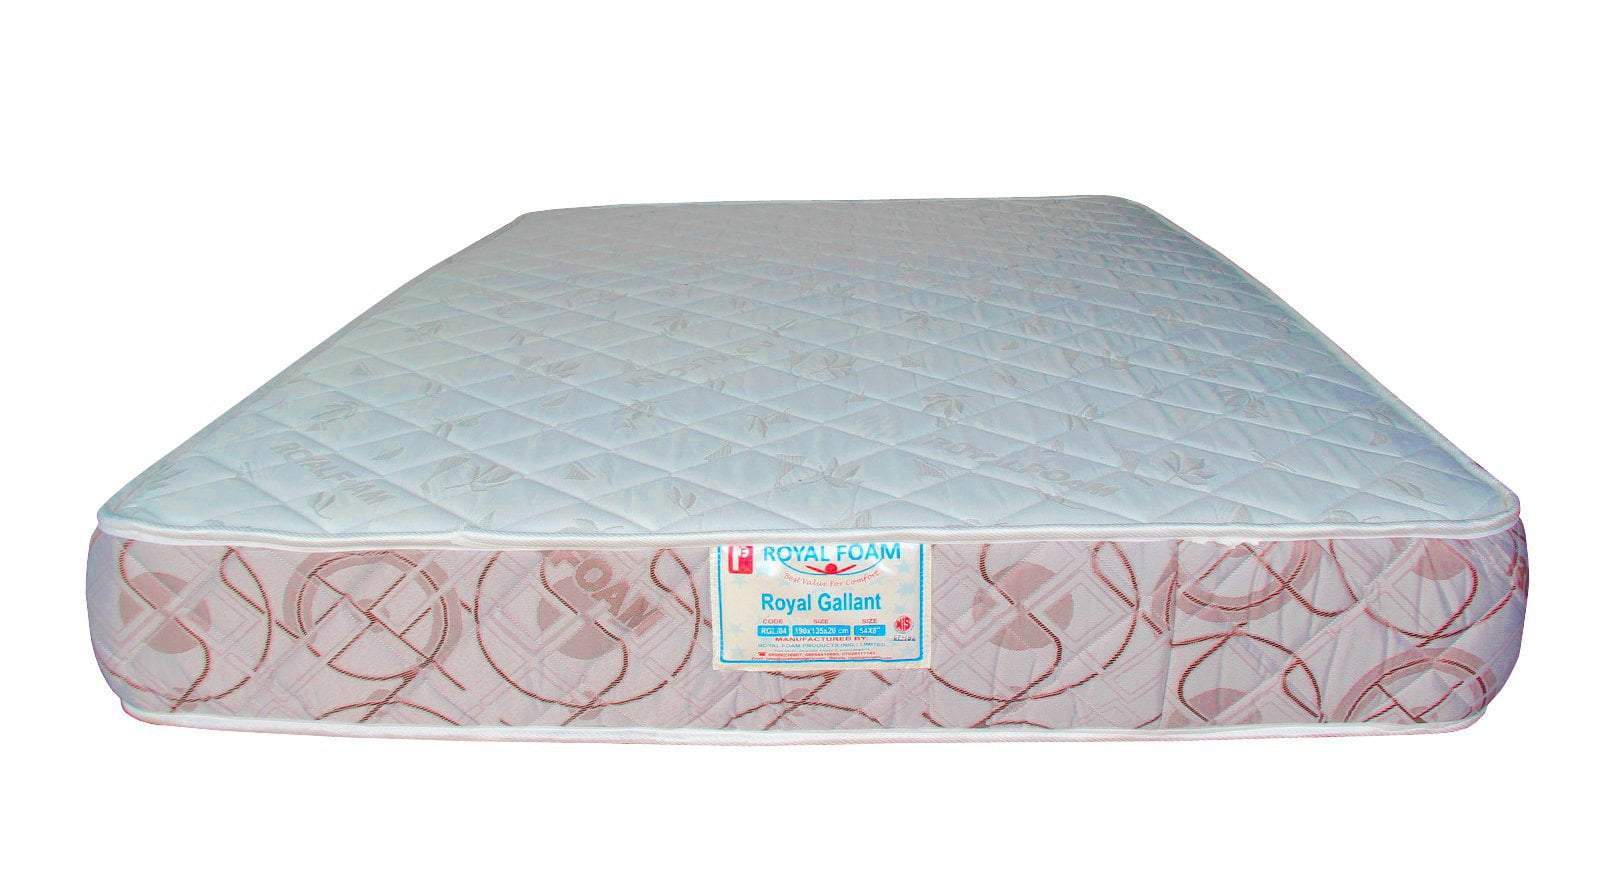 Royal Gallant Plus JACQUARD fabric-Fully Quilted Mattress 190 X 180 X 20 CM(6ft x 6ft x 8inches) 2 Adult (Queen Size)(Lagos Only)